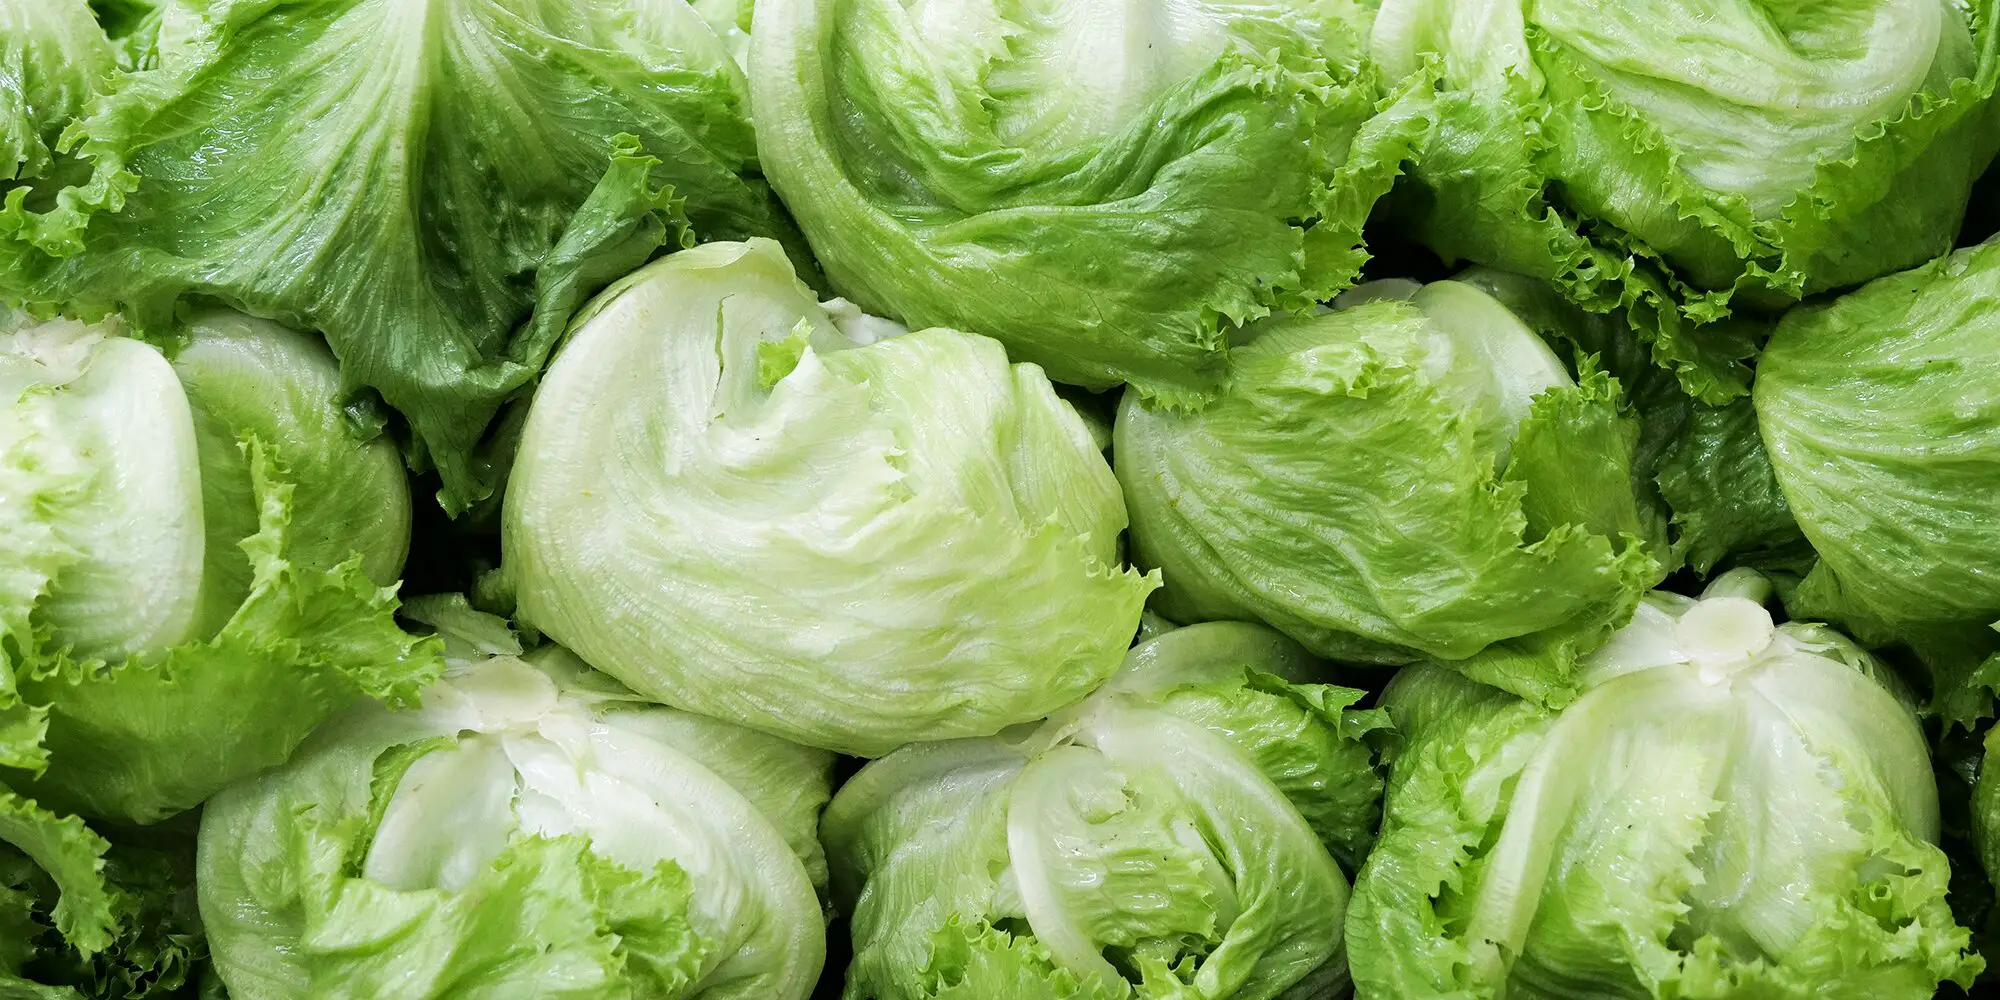 Lettuce Turning Red: Is It Safe To Eat?